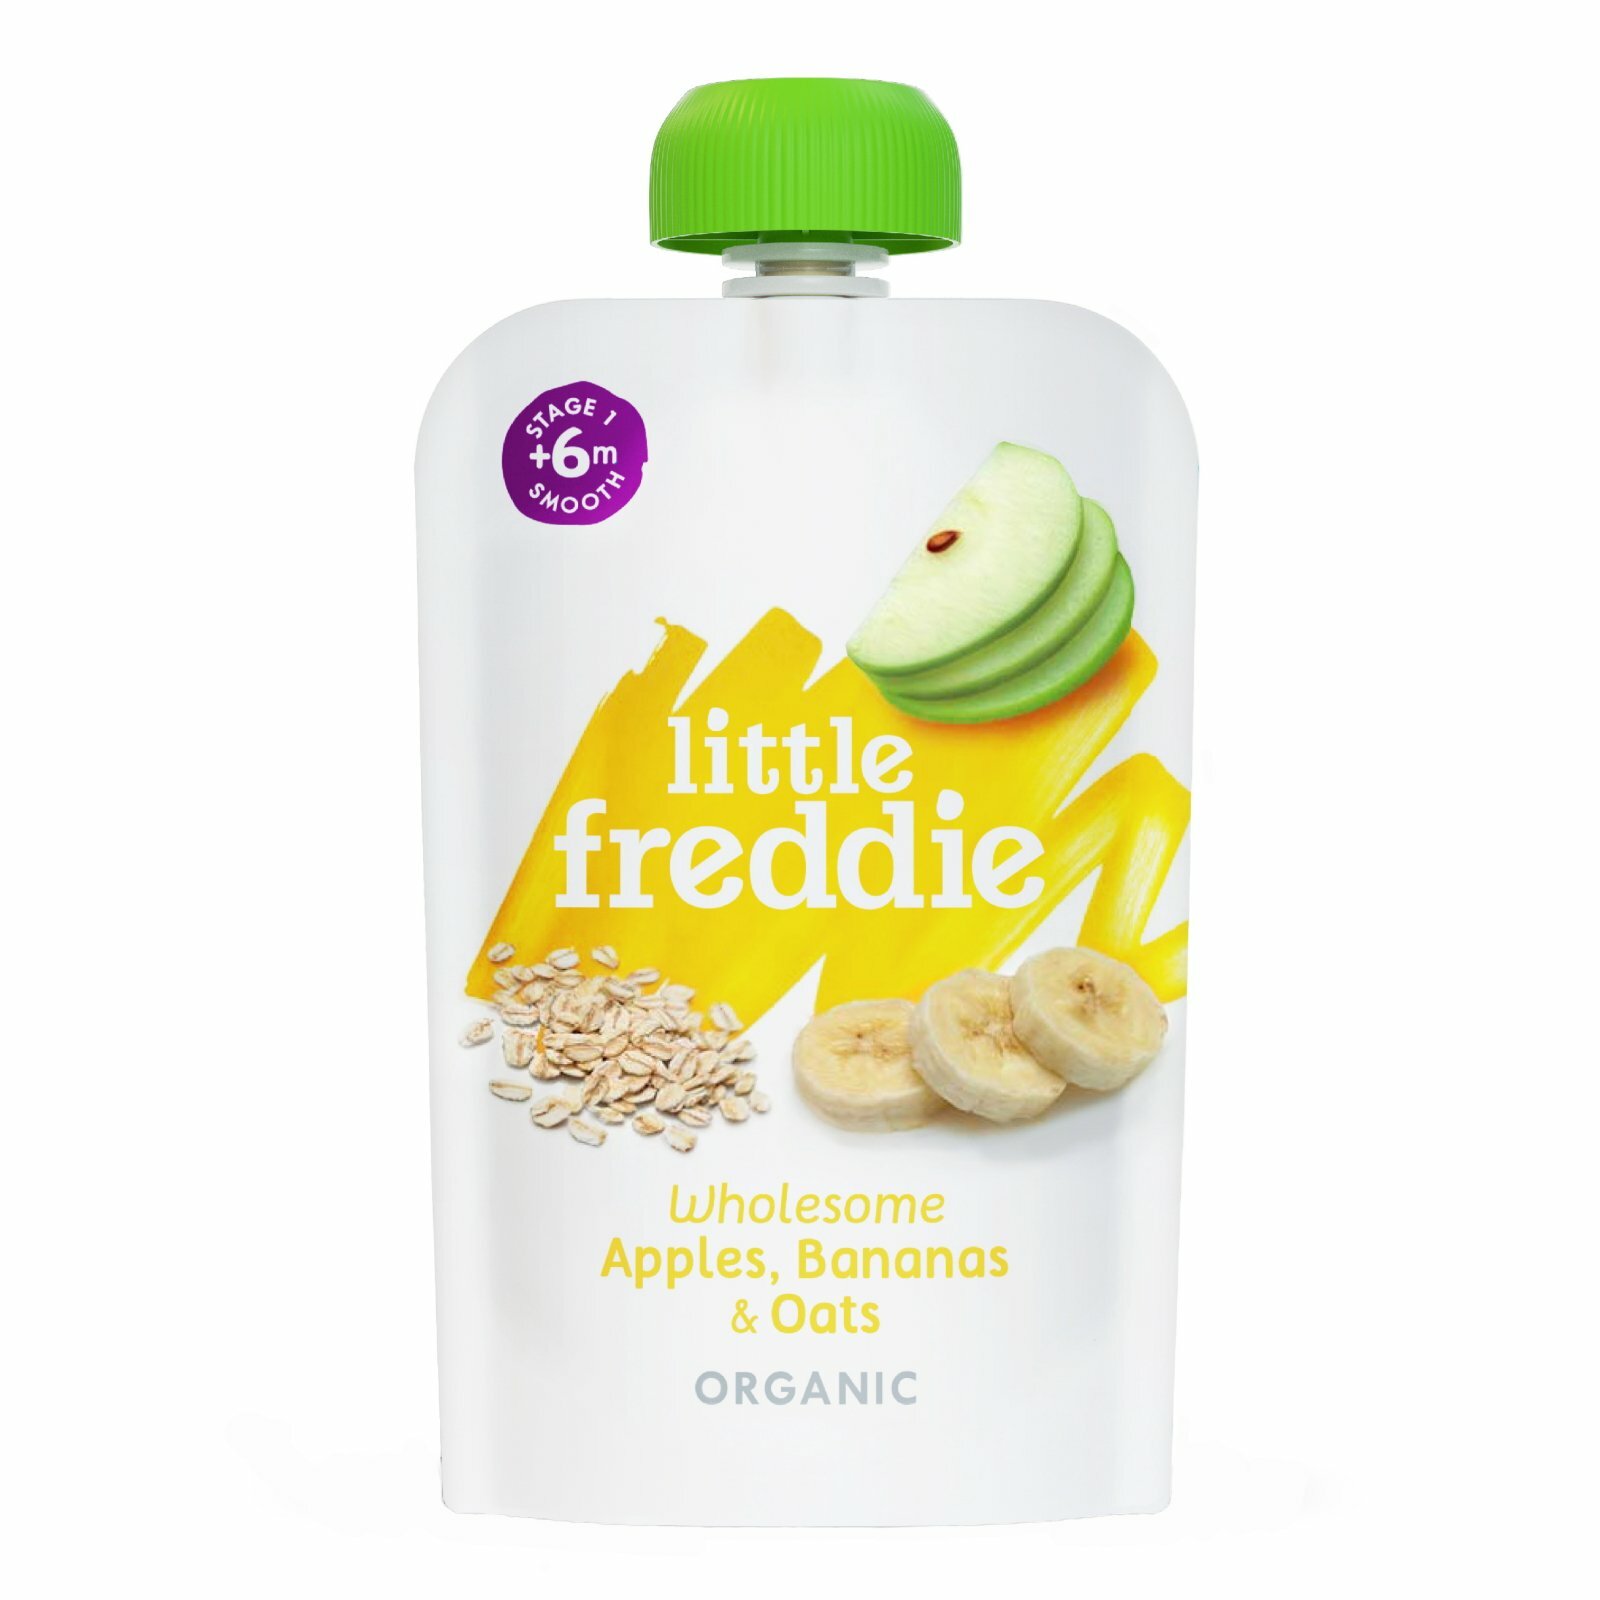 Little Freddie Wholesome Apples , Bananas & Oats - 100g  EXP:22/03/2023	